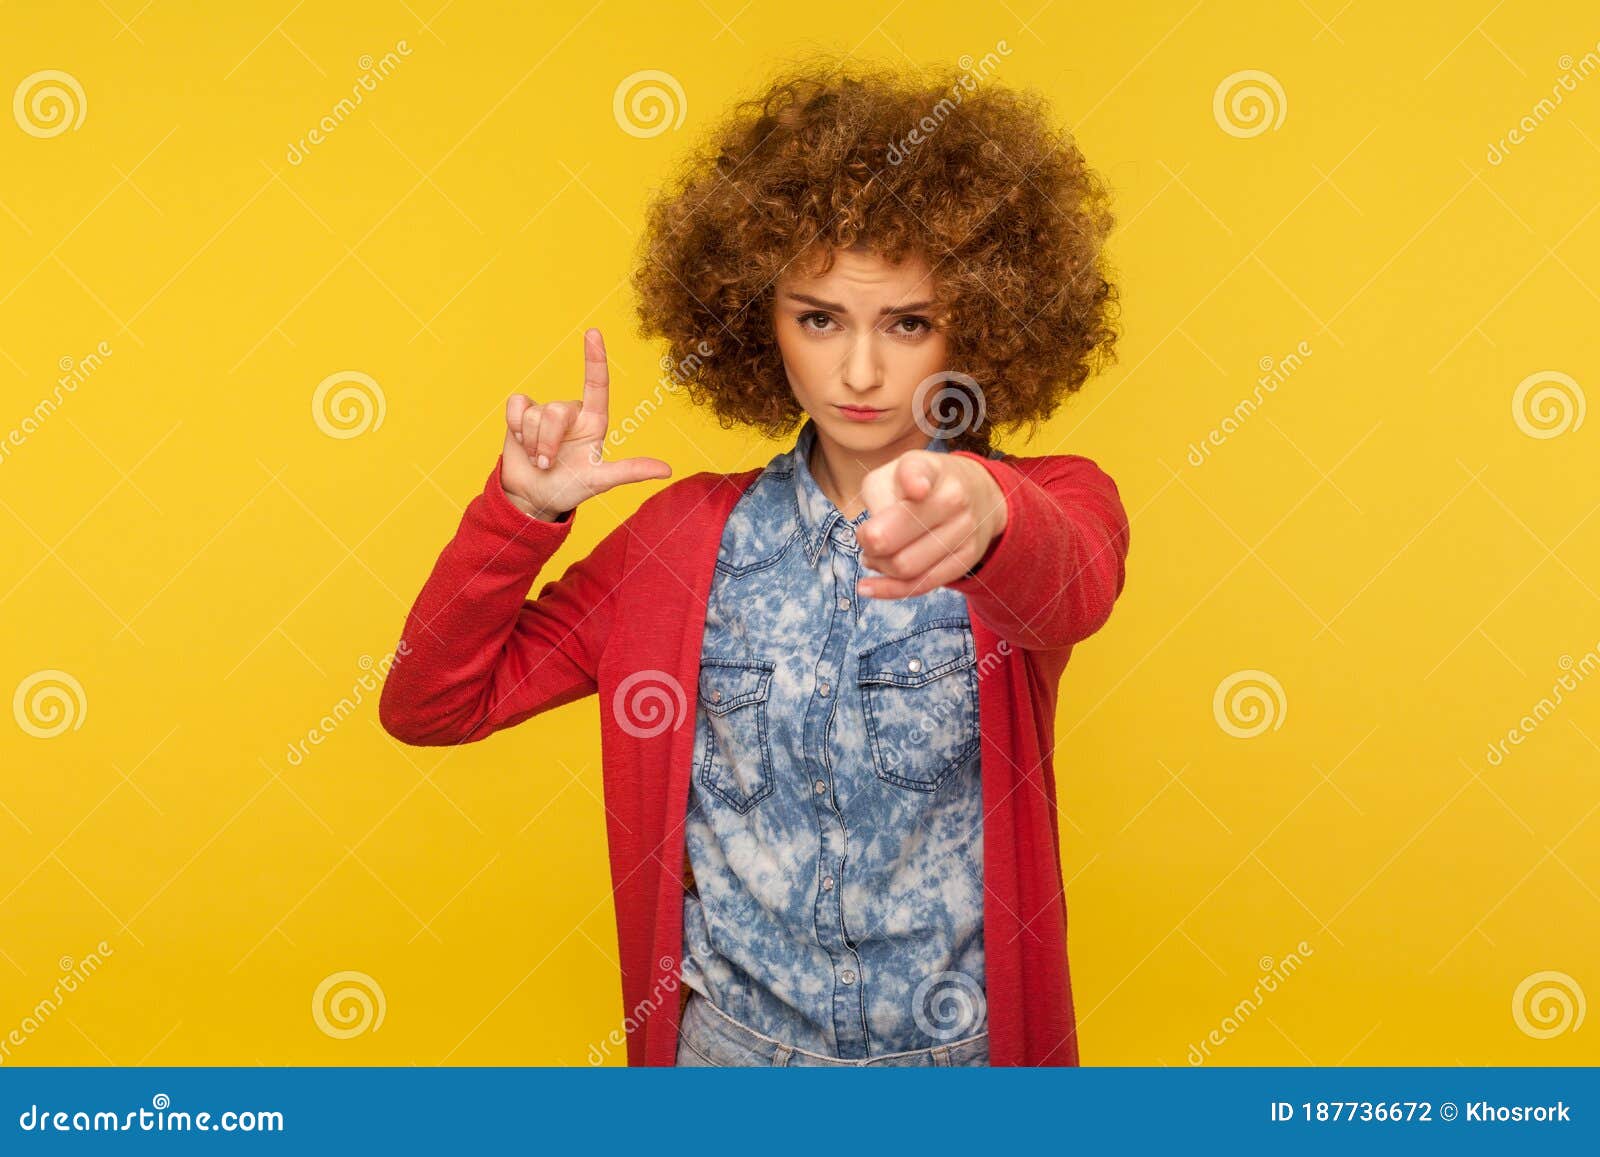 Portrait of Curly-haired Woman Expressing Disrespect, Showing L Finger ...